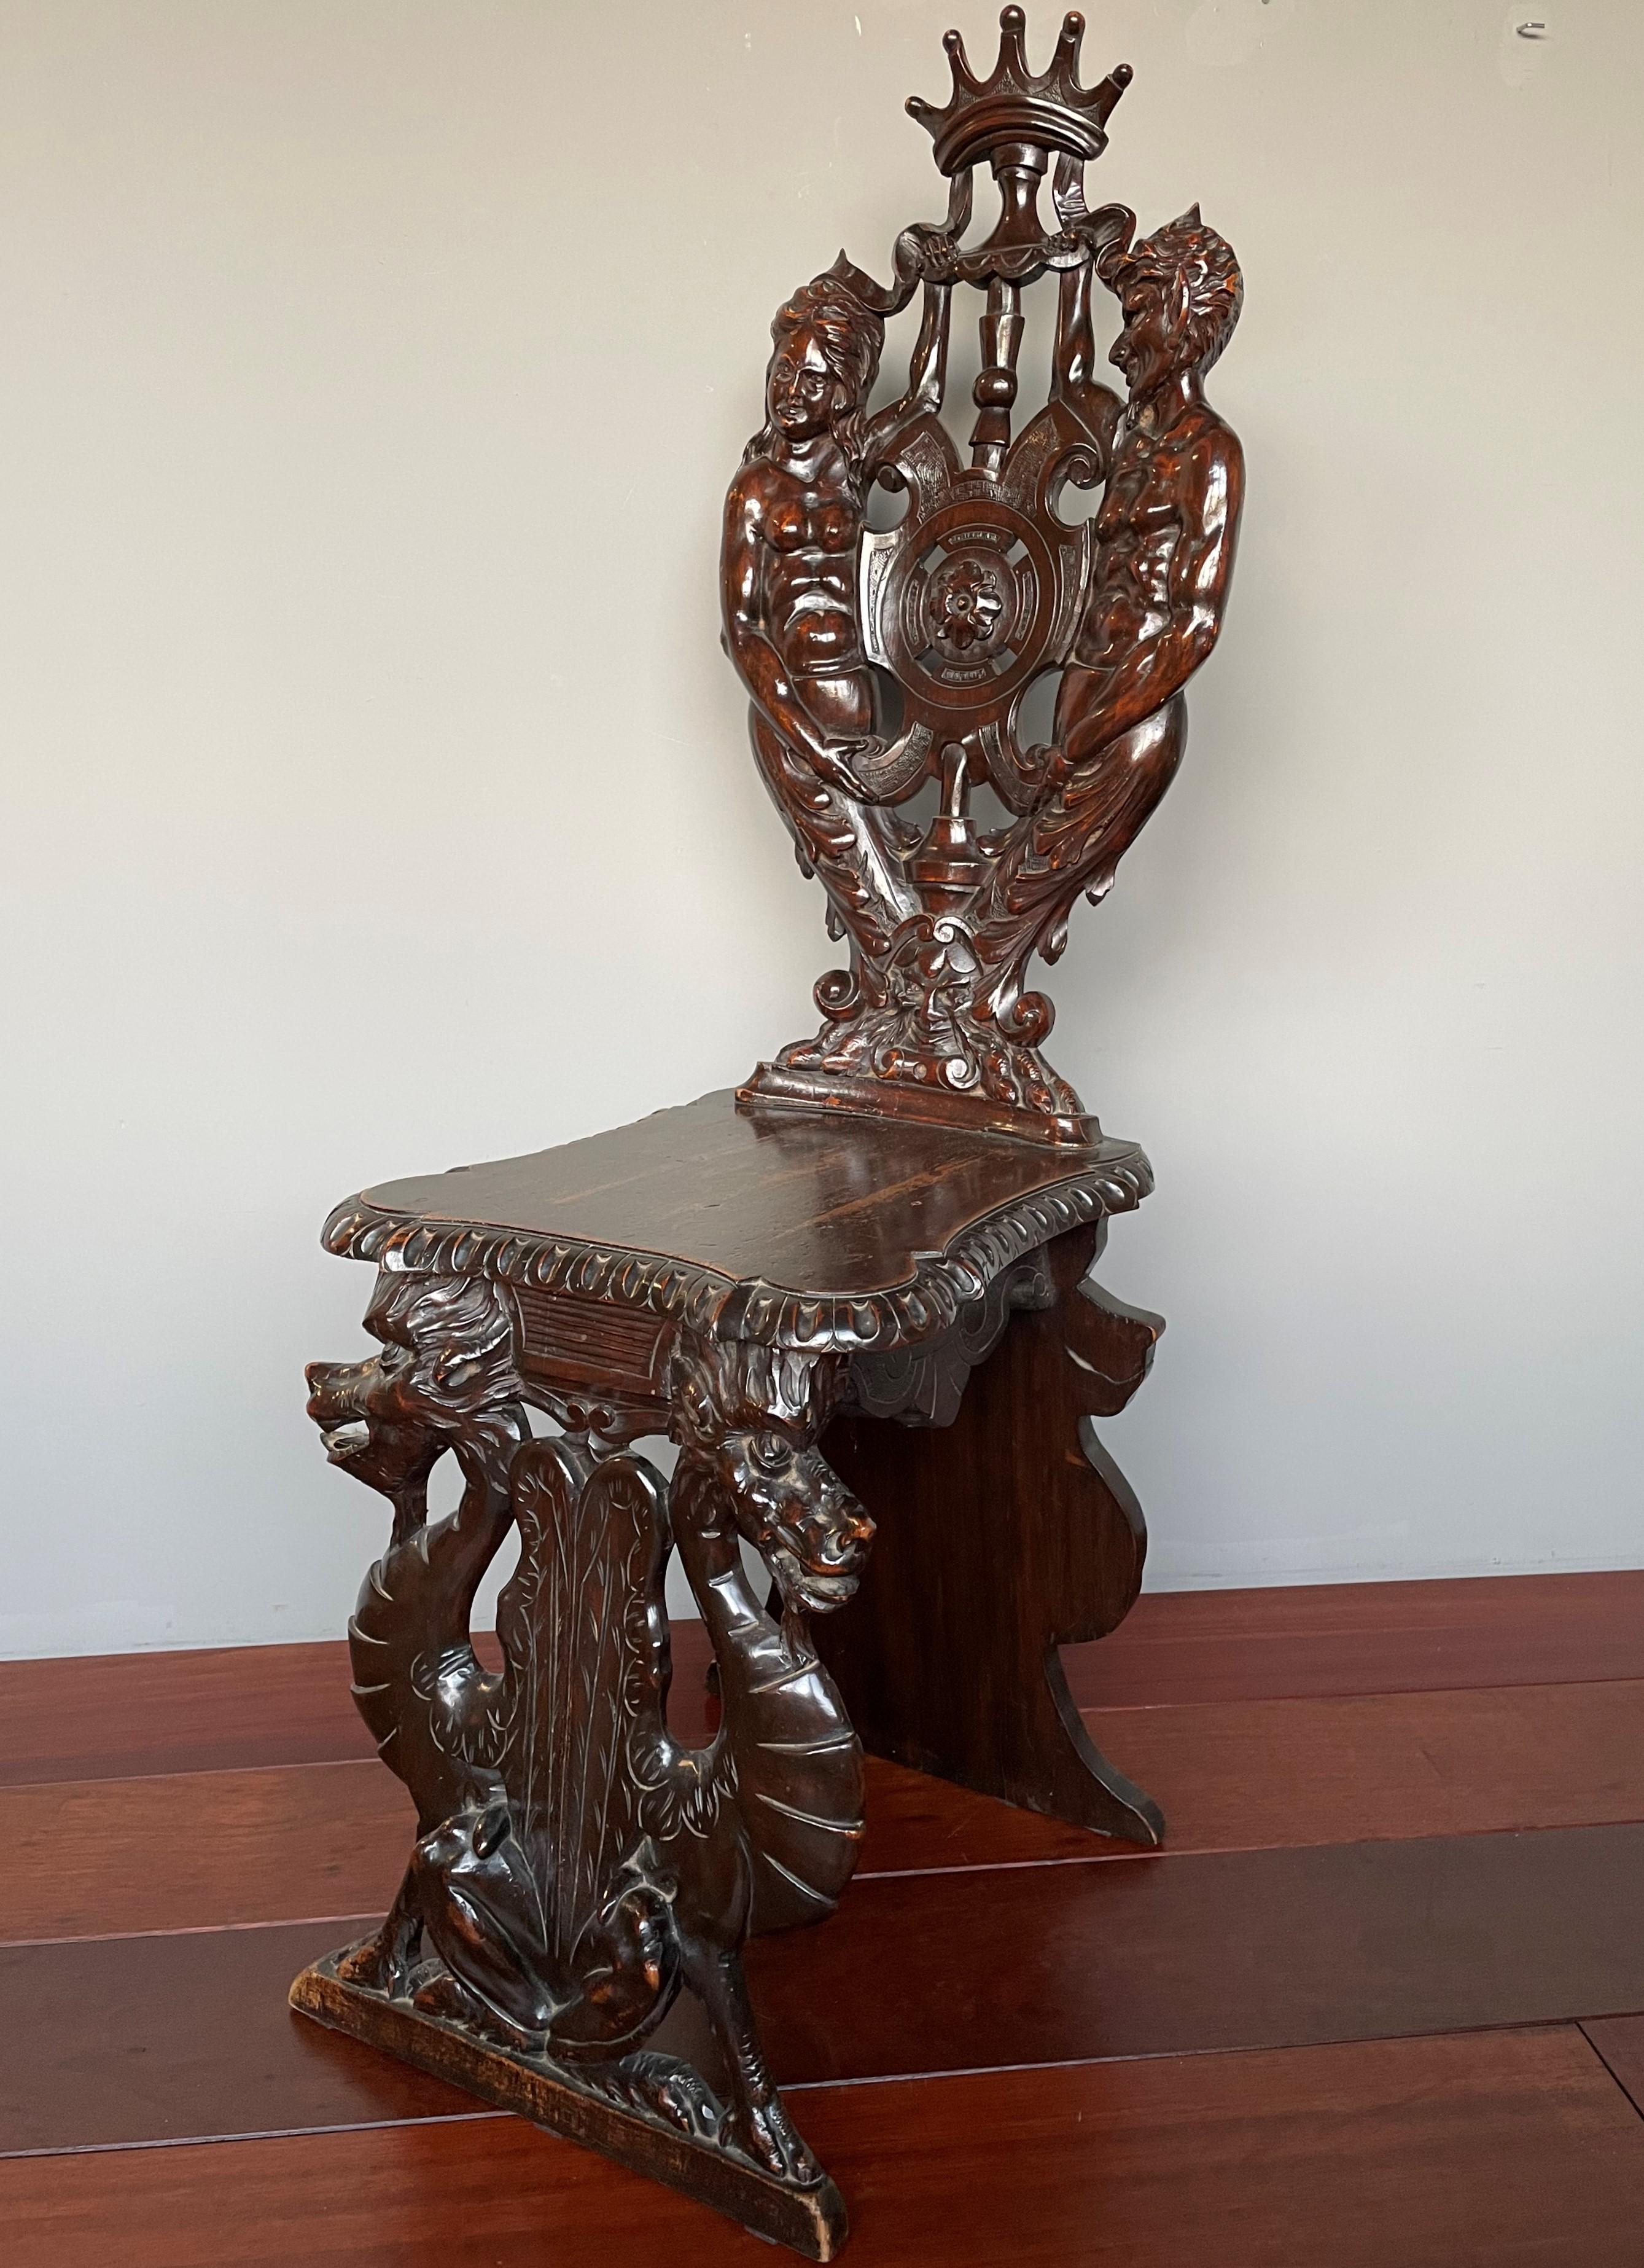 Rare and remarkable workmanship chair from the 1800s.

In this day and age it is very difficult to still find even one craftsman that is capable of hand carving a good quality sculpture. As you can see in our photos, in the 1800s there were still